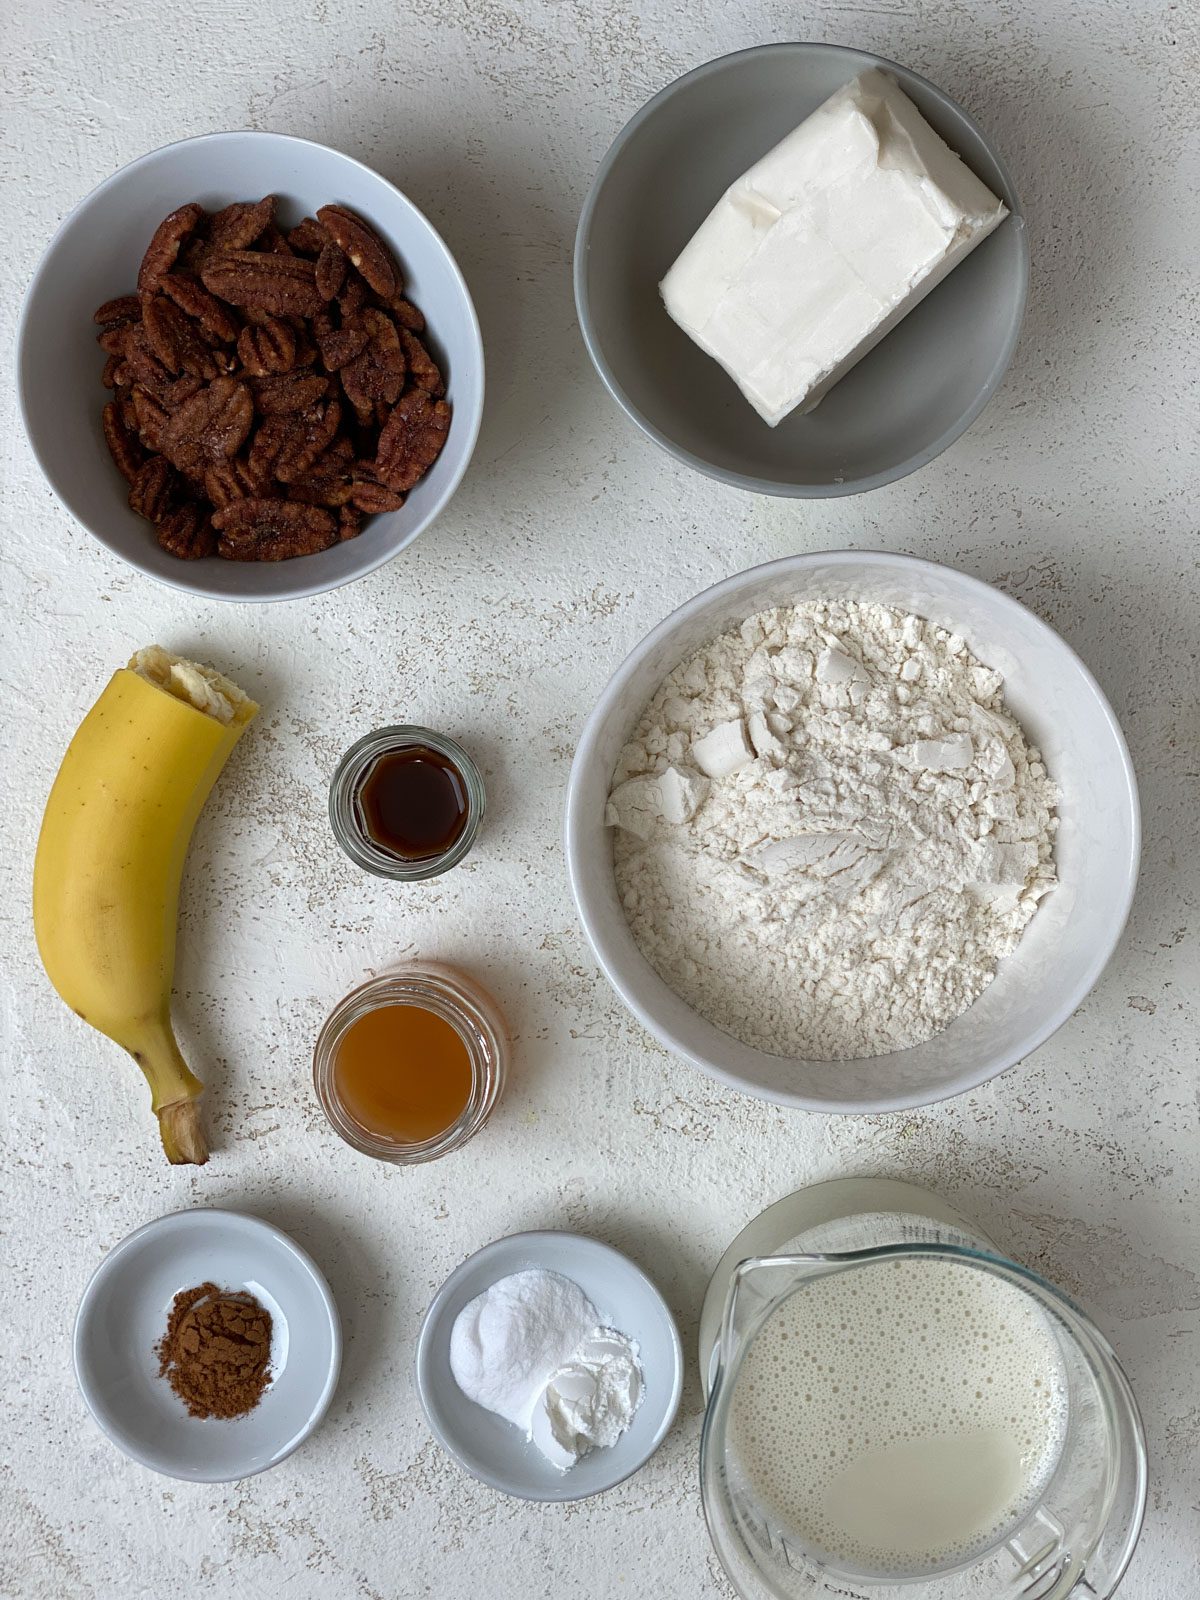 ingredients for Vegan Cinnamon and Banana Pecan Muffins measured out against a white surface